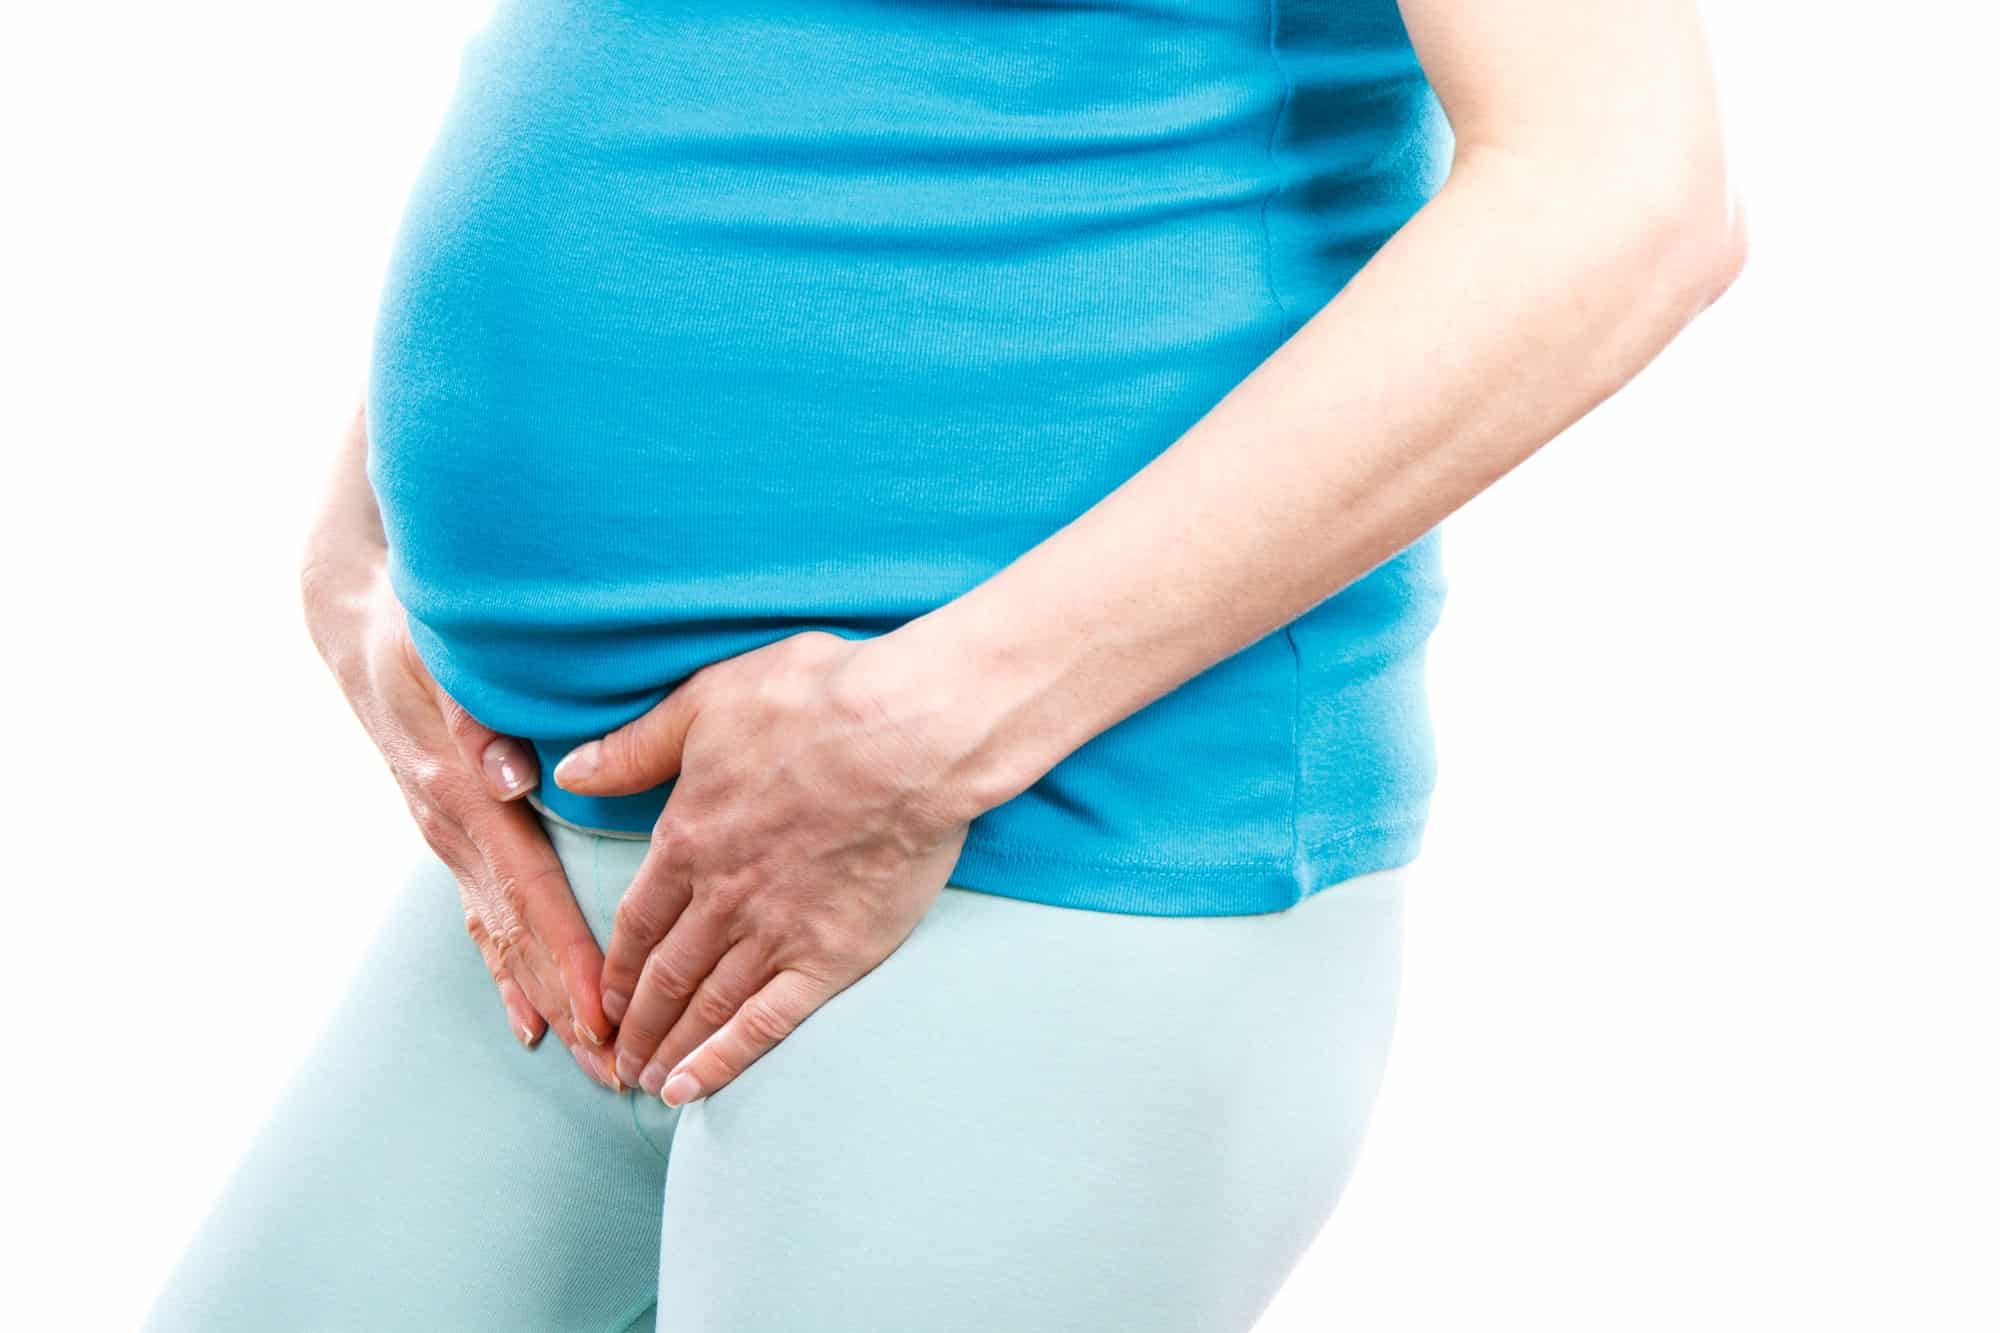 Controlling Your Bladder During Pregnancy